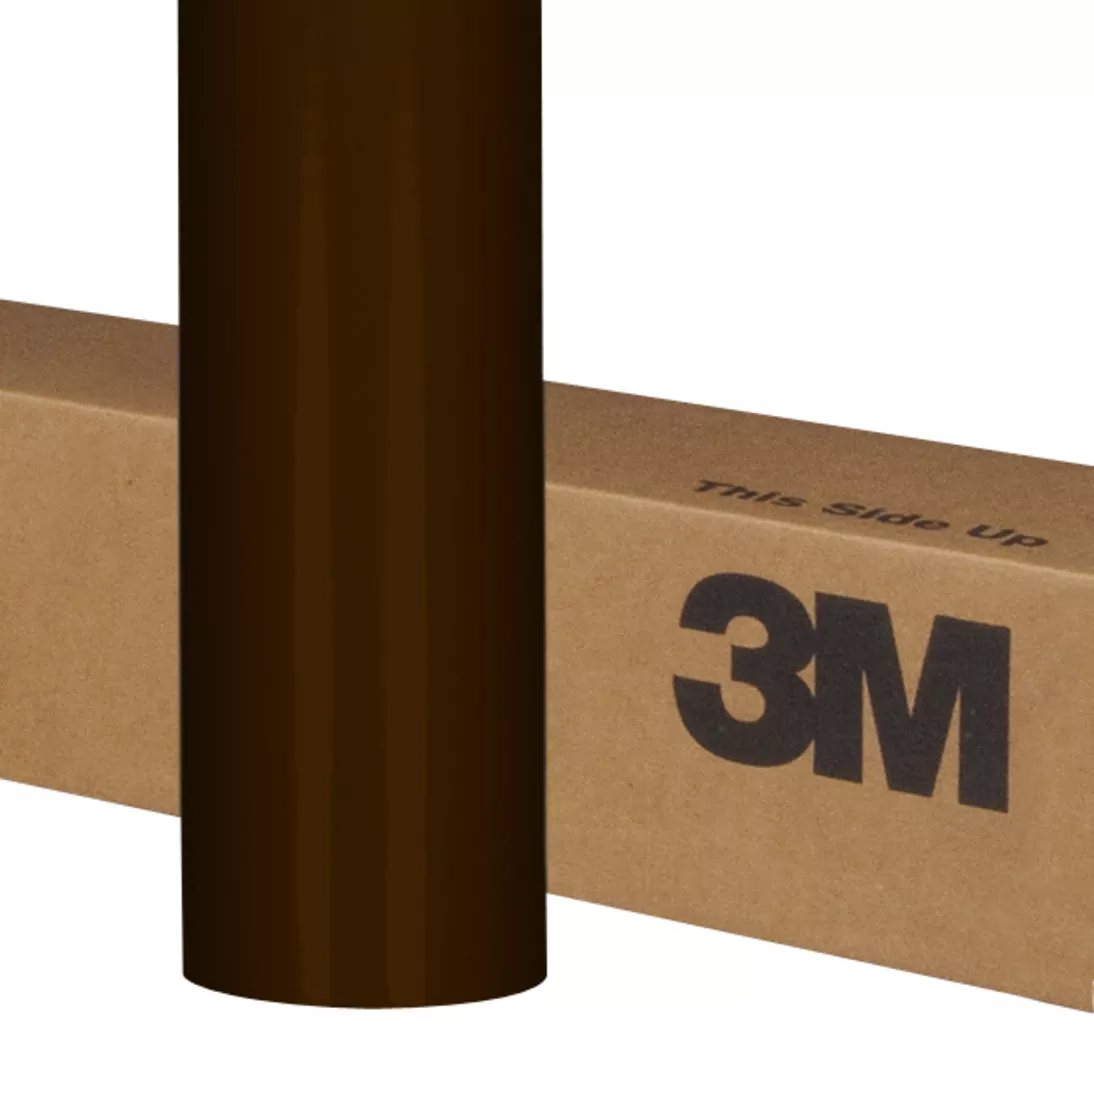 3M™ Scotchcal™ Graphic Film Series 50-92, Brown, 48 in x 50 yd